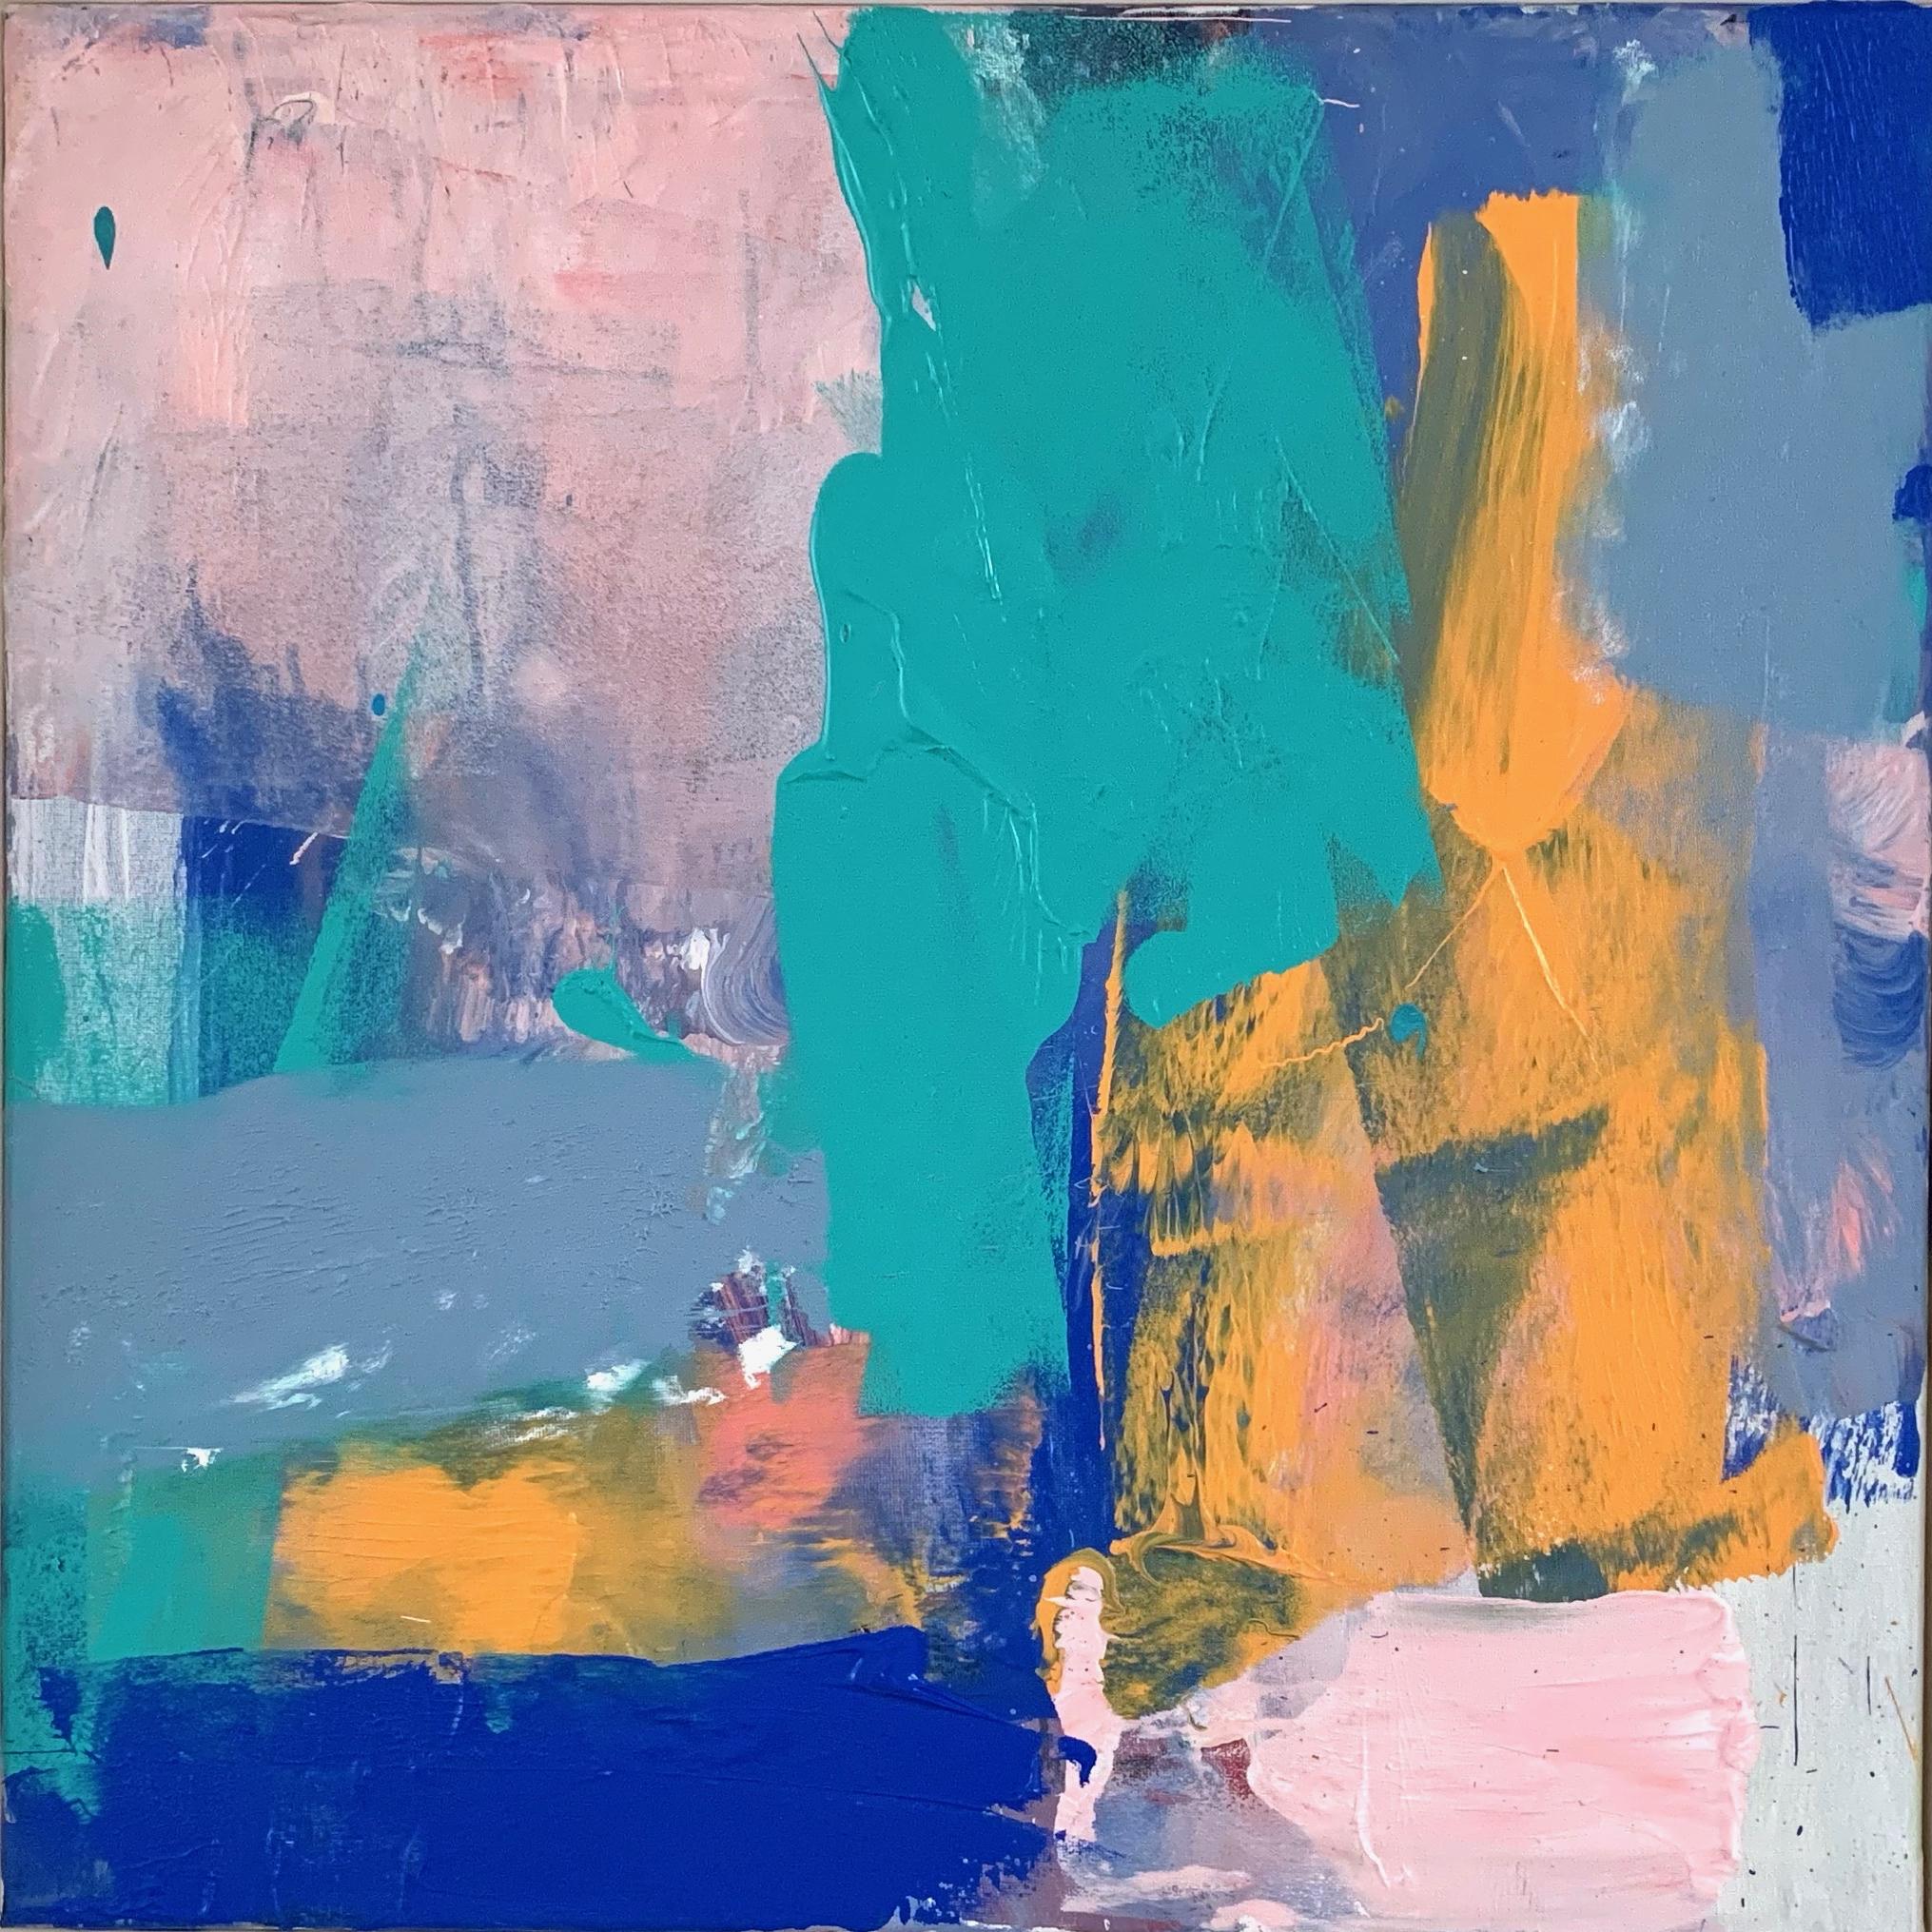 Crete: Abstract Painting by Deborah Lanyon with pink and blue